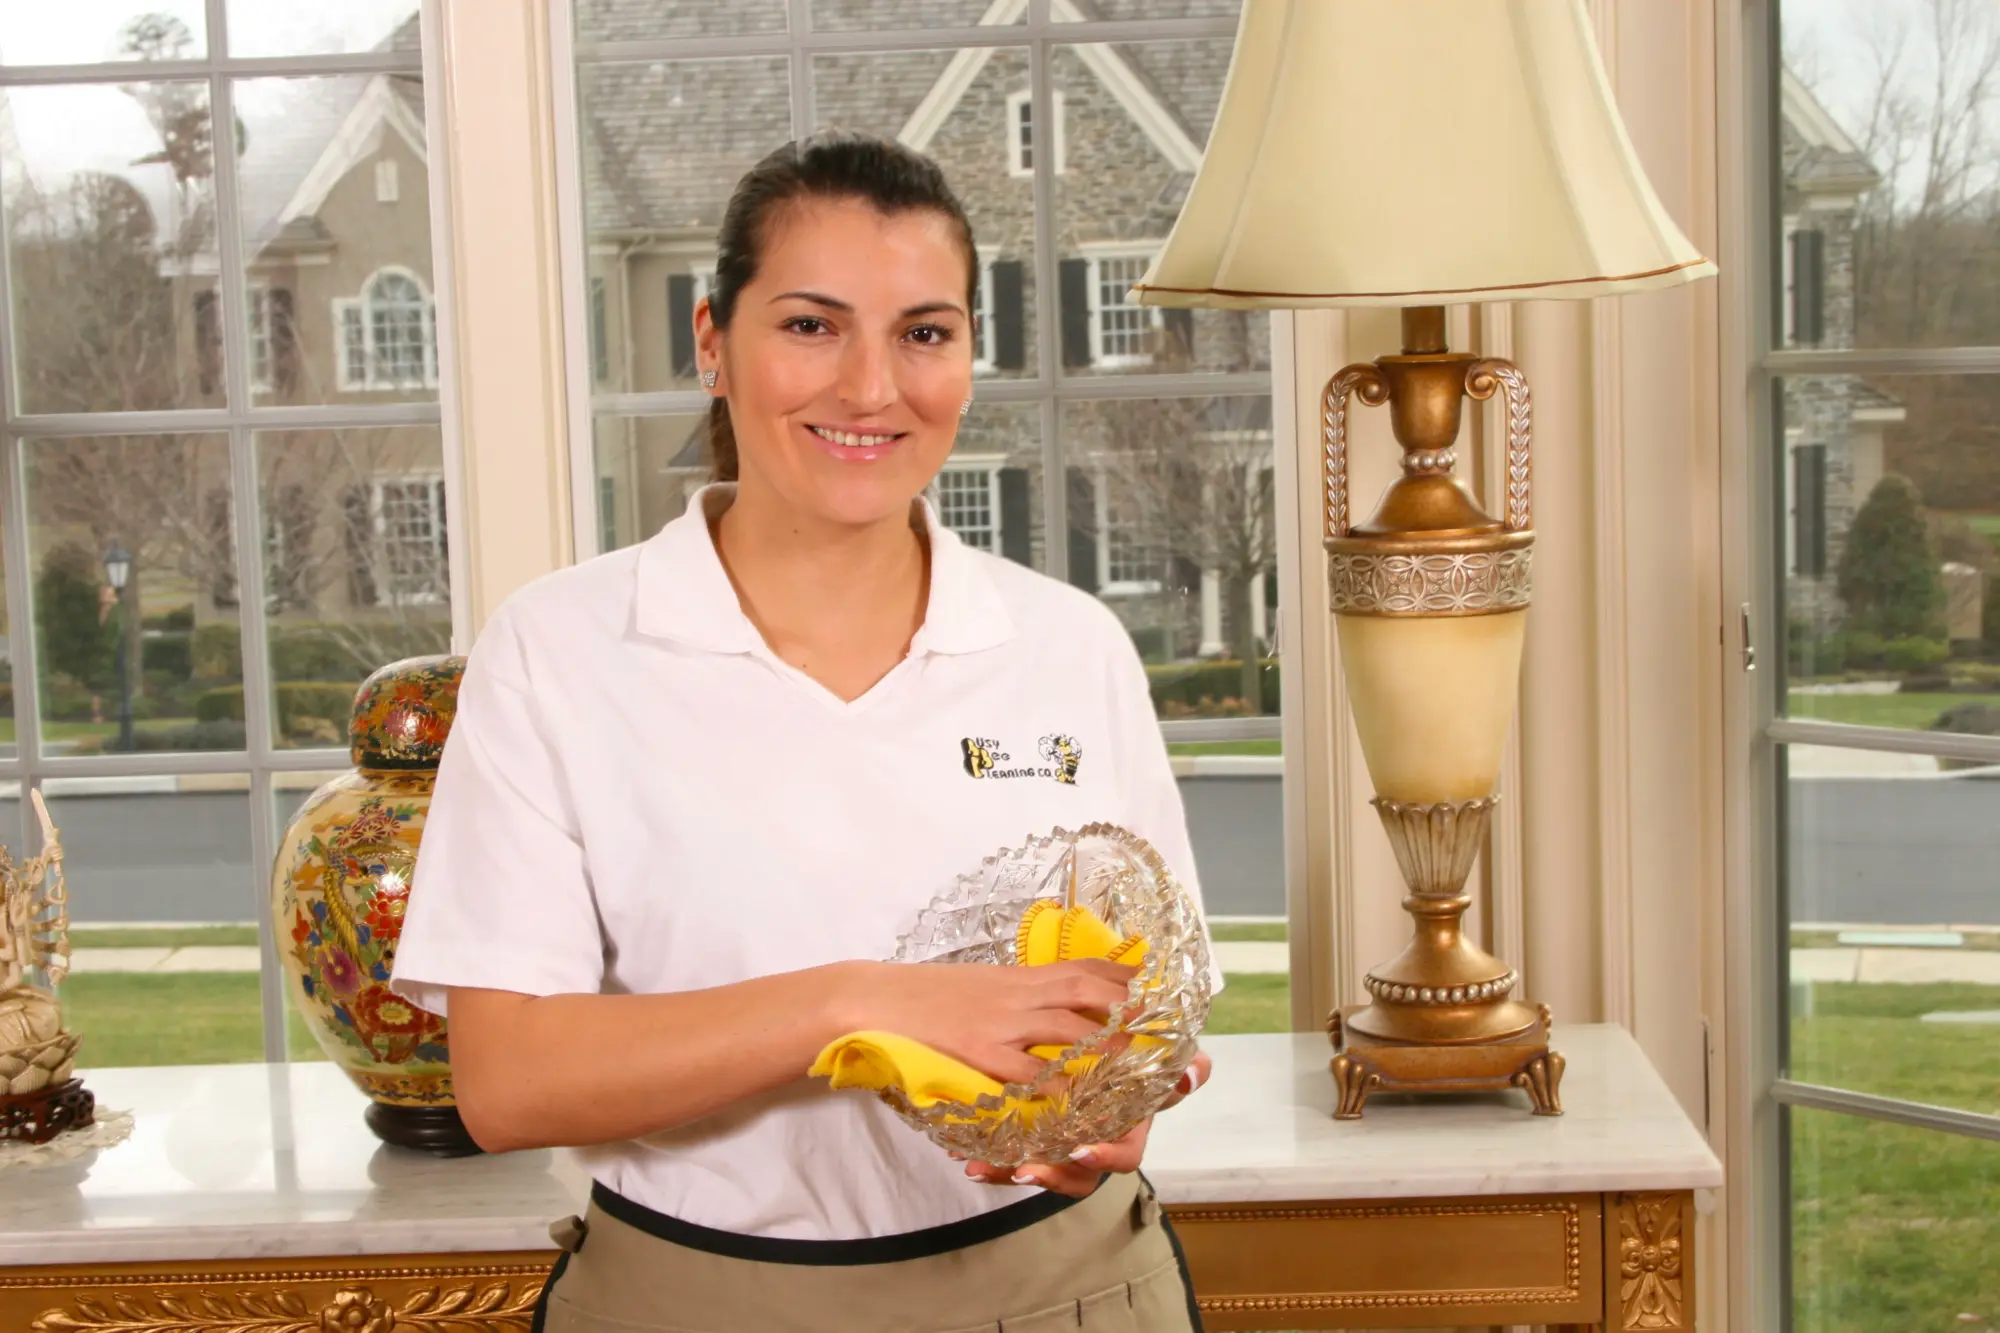 cleaning service in glen mills pa do an excellent job, get your glen mills pa house clean with free estimates, our house cleaner in glen mills pa does an amazing job, we offer professional services in glen mills pa